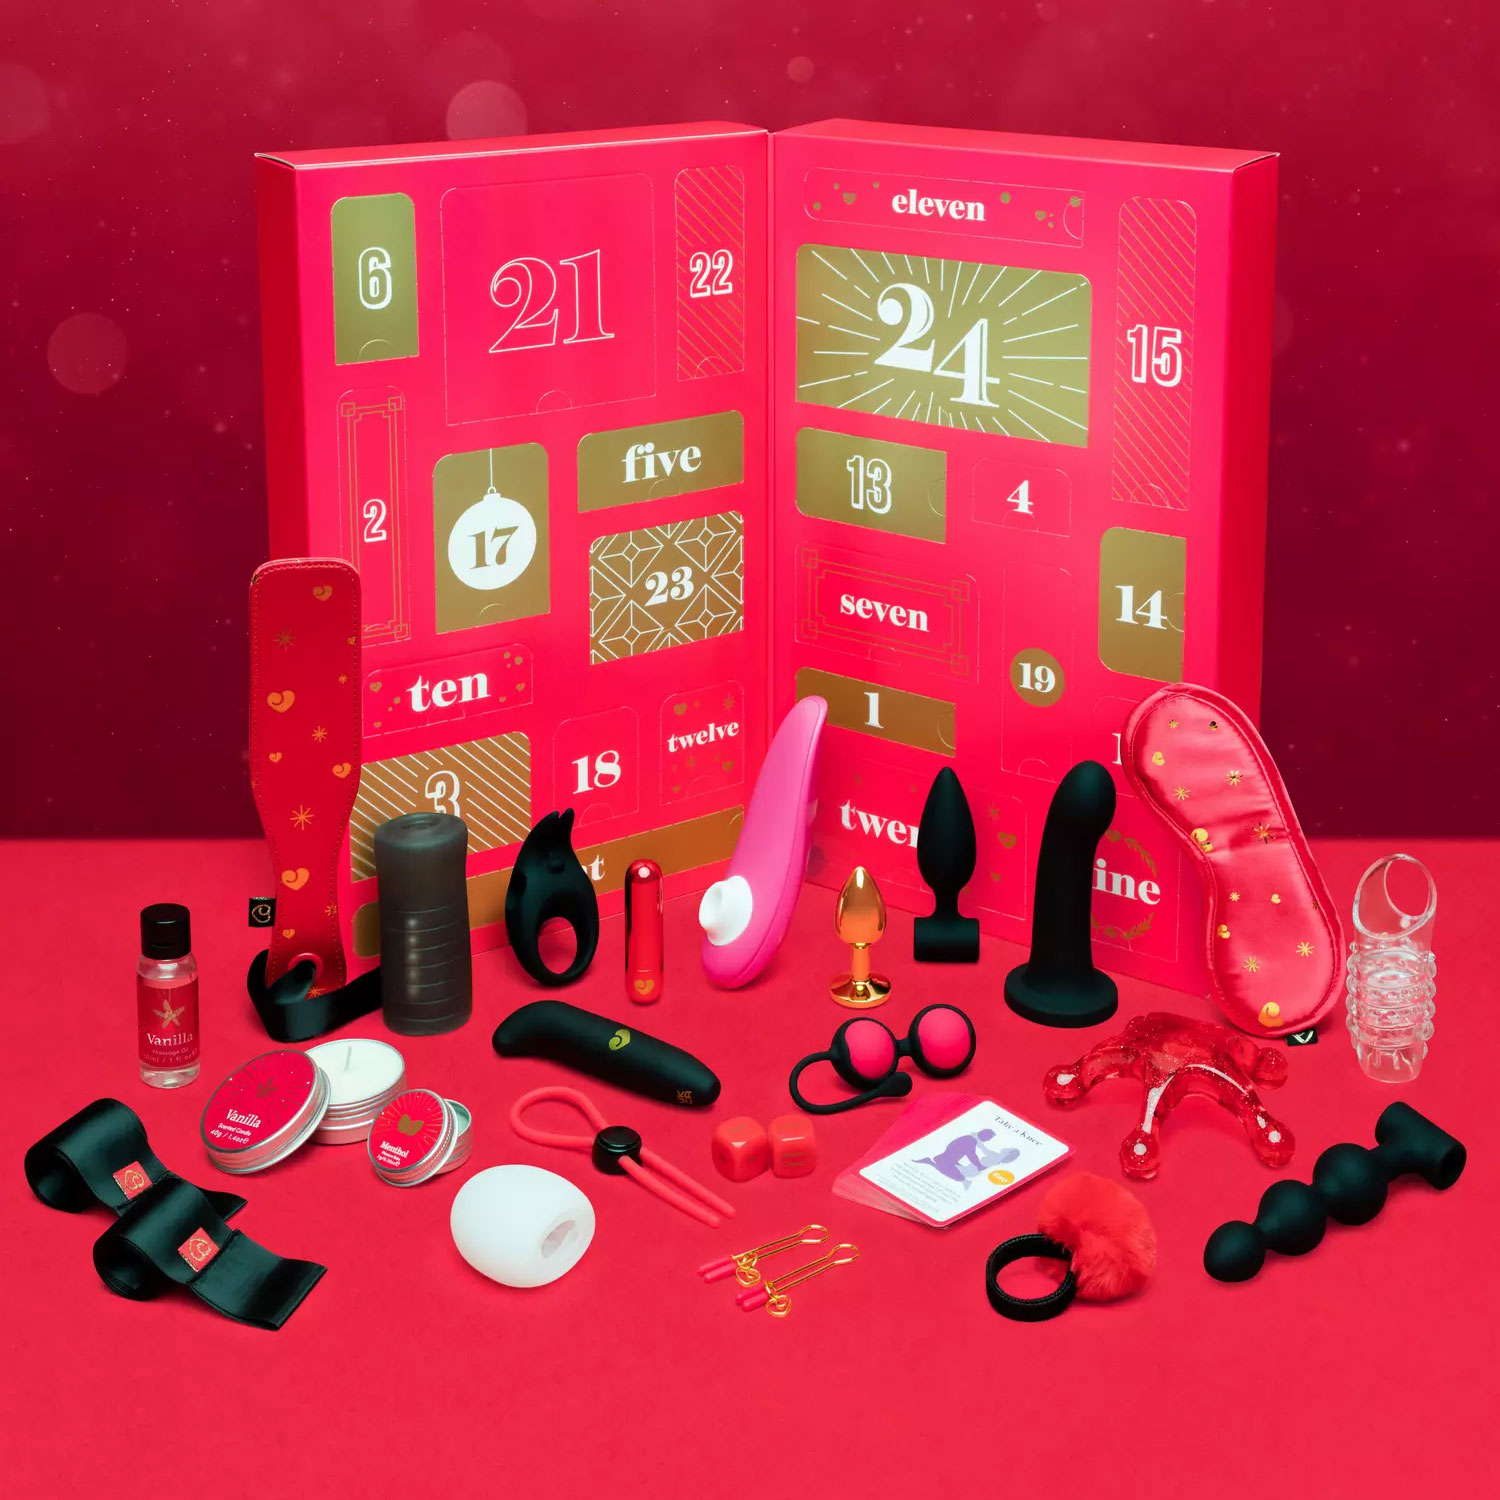 Lovehoney Best Sex Of Your Life Couple's Sex Toy Advent Calendar (Man + Woman), Red, hi-res Lovehoney Best Sex Of Your Life Couple's Sex Toy Advent Calendar (Man + Woman), Red, hi-res Lovehoney Best Sex Of Your Life Couple's Sex Toy Advent Calendar (Man + Woman), Red, hi-res Lovehoney Best Sex Of Your Life Couple's Sex Toy Advent Calendar (Man + Woman), Red, hi-res Lovehoney Best Sex Of Your Life Couple's Sex Toy Advent Calendar (Man + Woman), Red, hi-res  Lovehoney Best Sex Of Your Life Couple's Sex Toy Advent Calendar (Man + Woman)